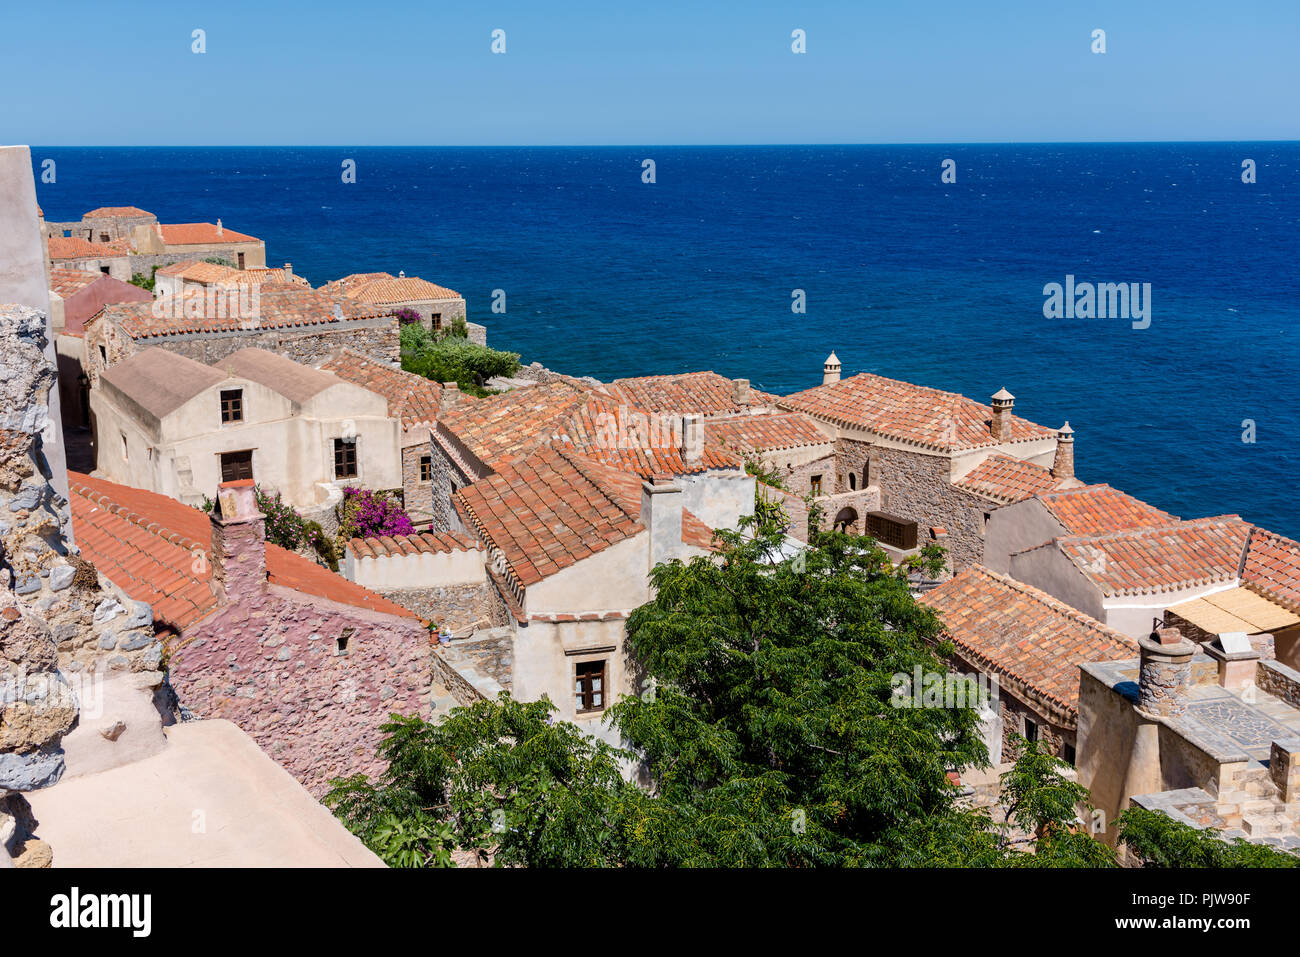 Traditional coastal village on Greek island with red slate roofs, chimneys and adobe walls Stock Photo